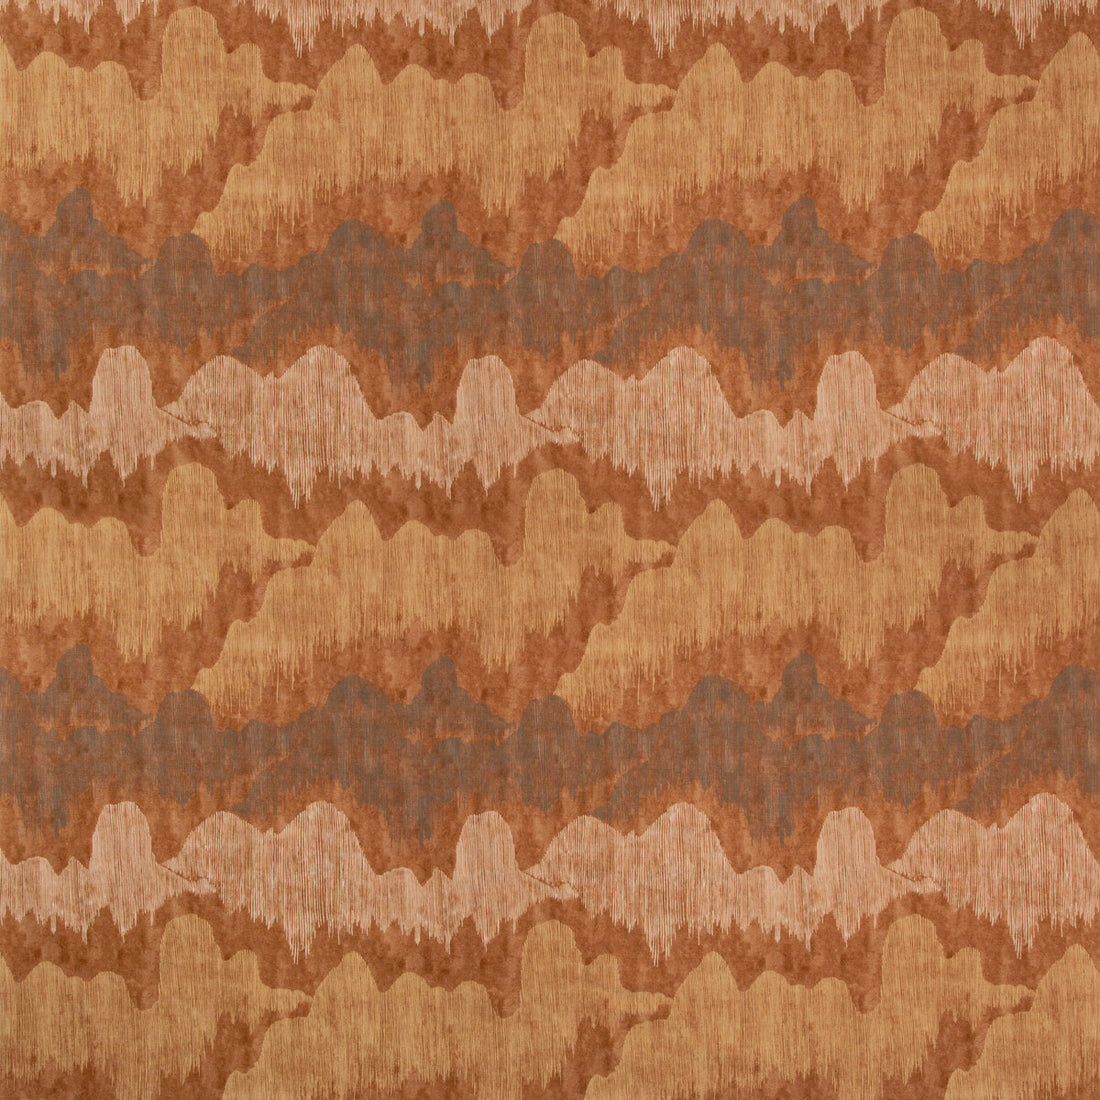 Cascadia fabric in saffron color - pattern GWF-3755.124.0 - by Lee Jofa Modern in the Kelly Wearstler V collection